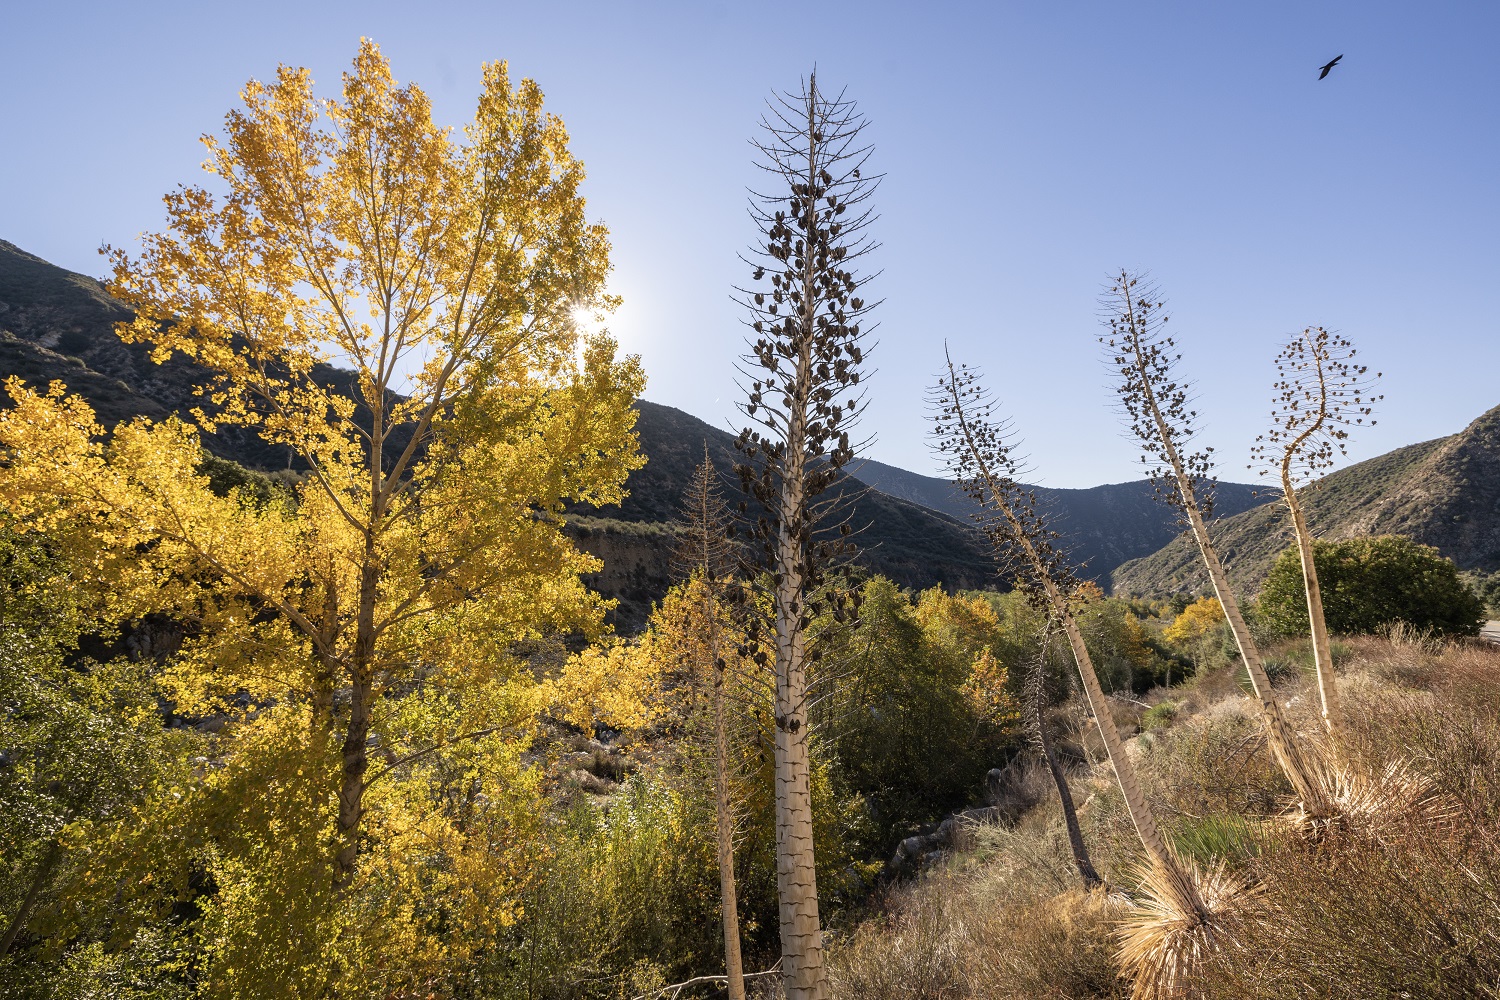 Yellow fall foliage on oak and yucca in Angeles National Forest